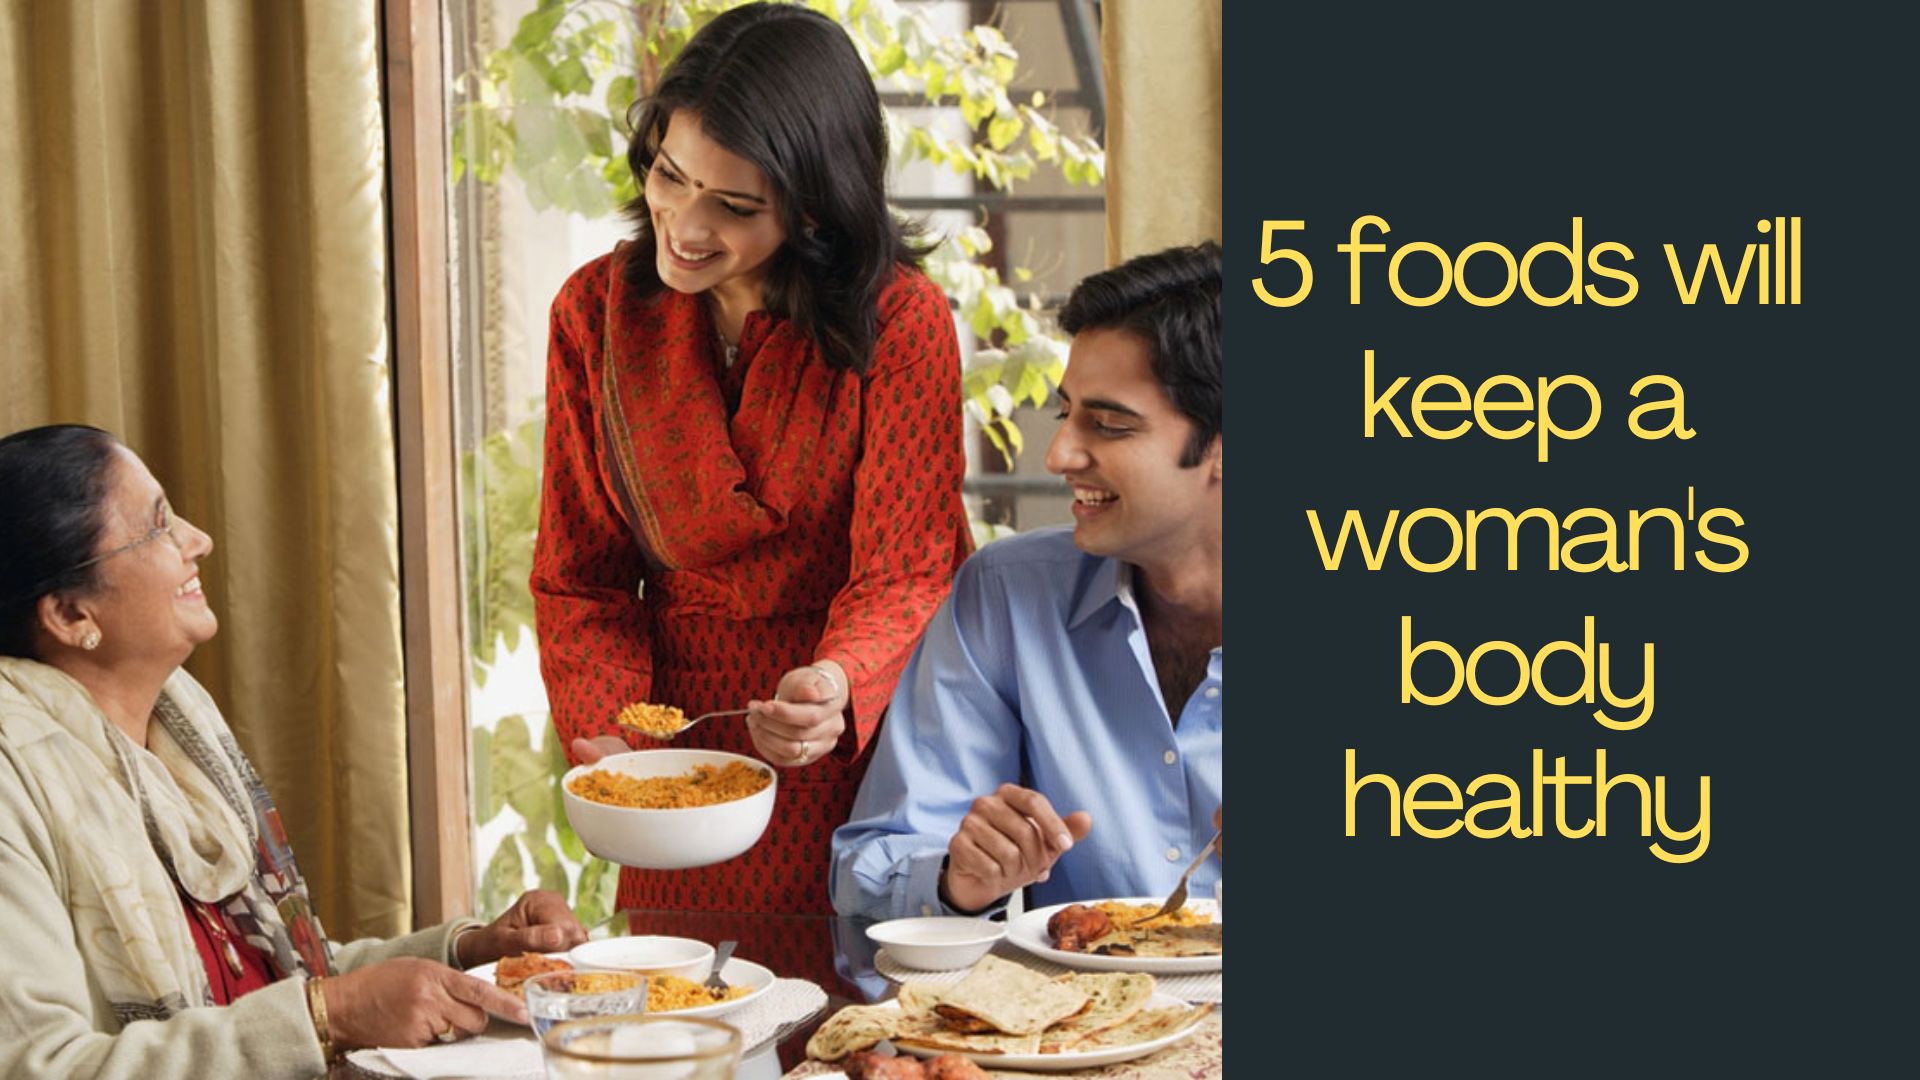 5 foods will keep a woman's body healthy - 5 foods wil
GCEeF]